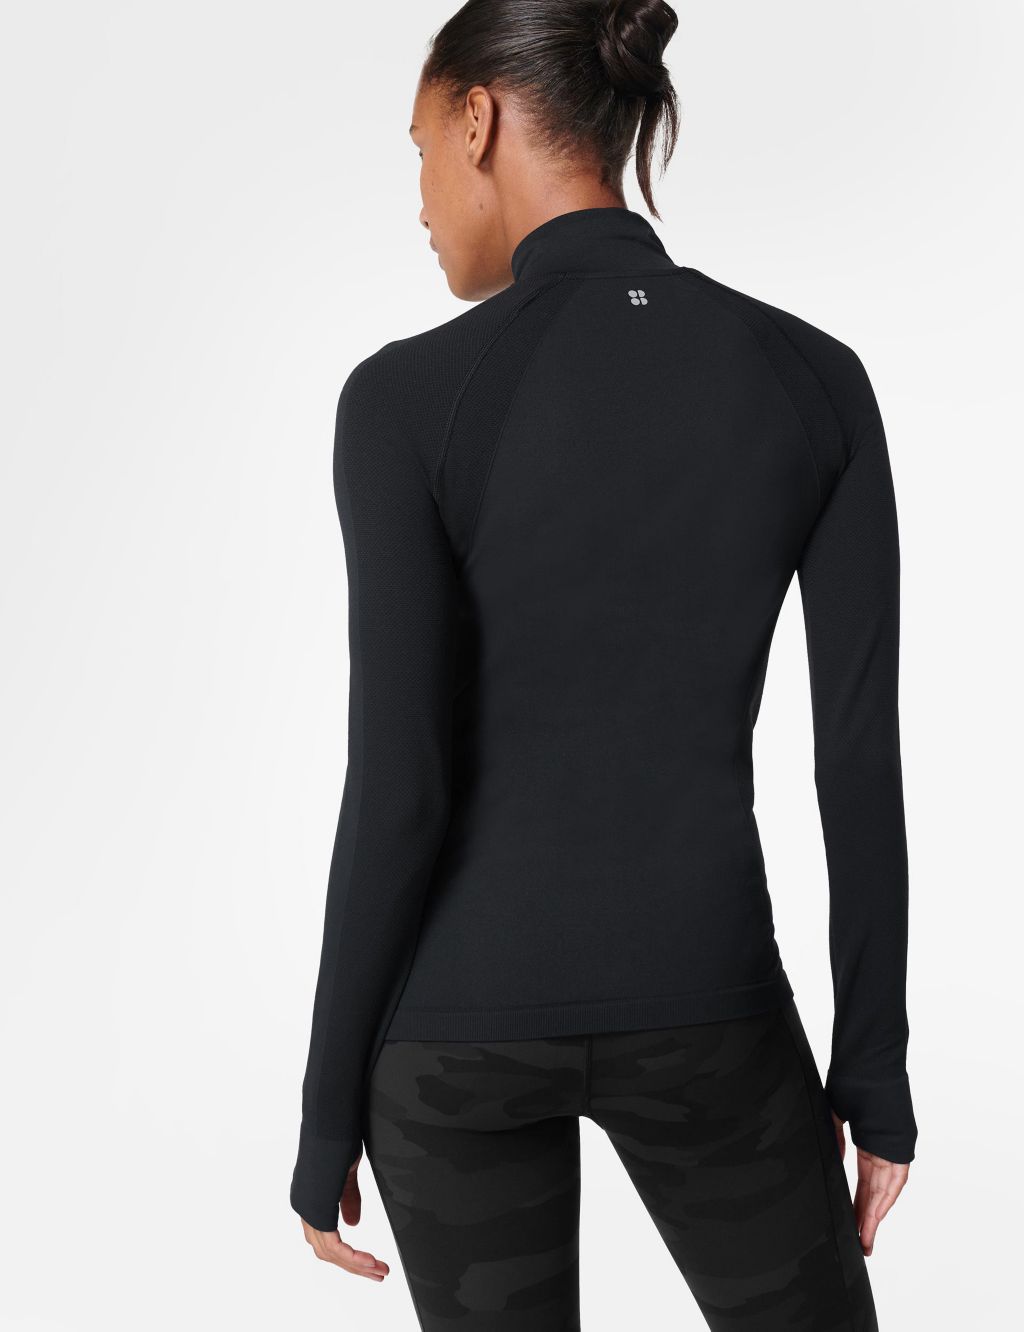 Athlete Funnel Neck Half Zip Fitted Top image 5